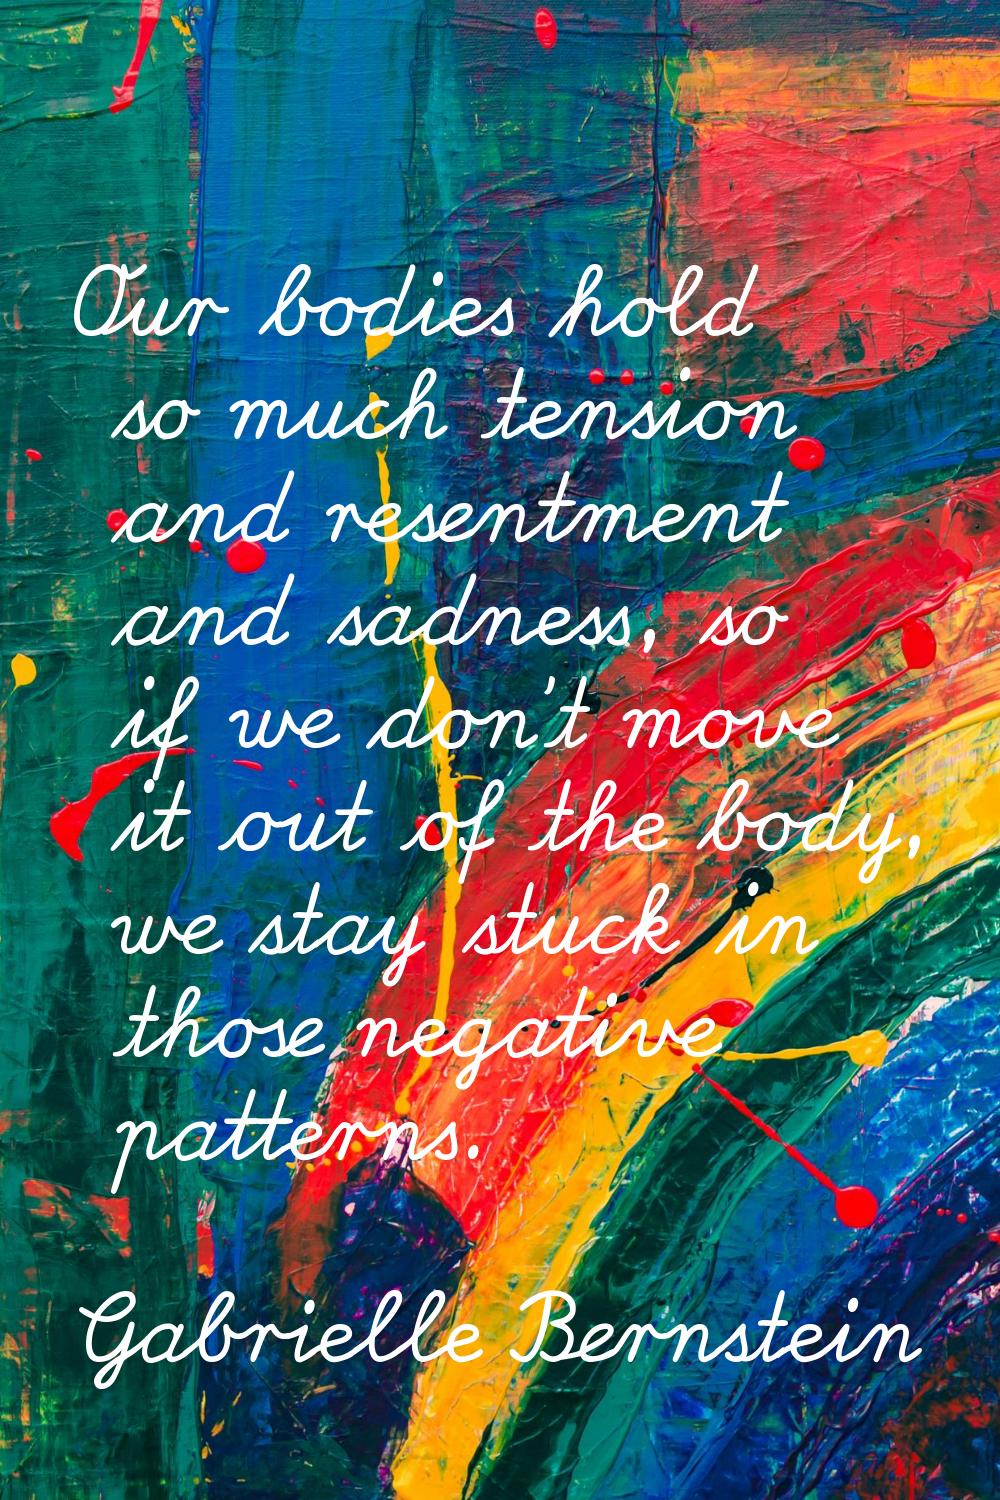 Our bodies hold so much tension and resentment and sadness, so if we don't move it out of the body,